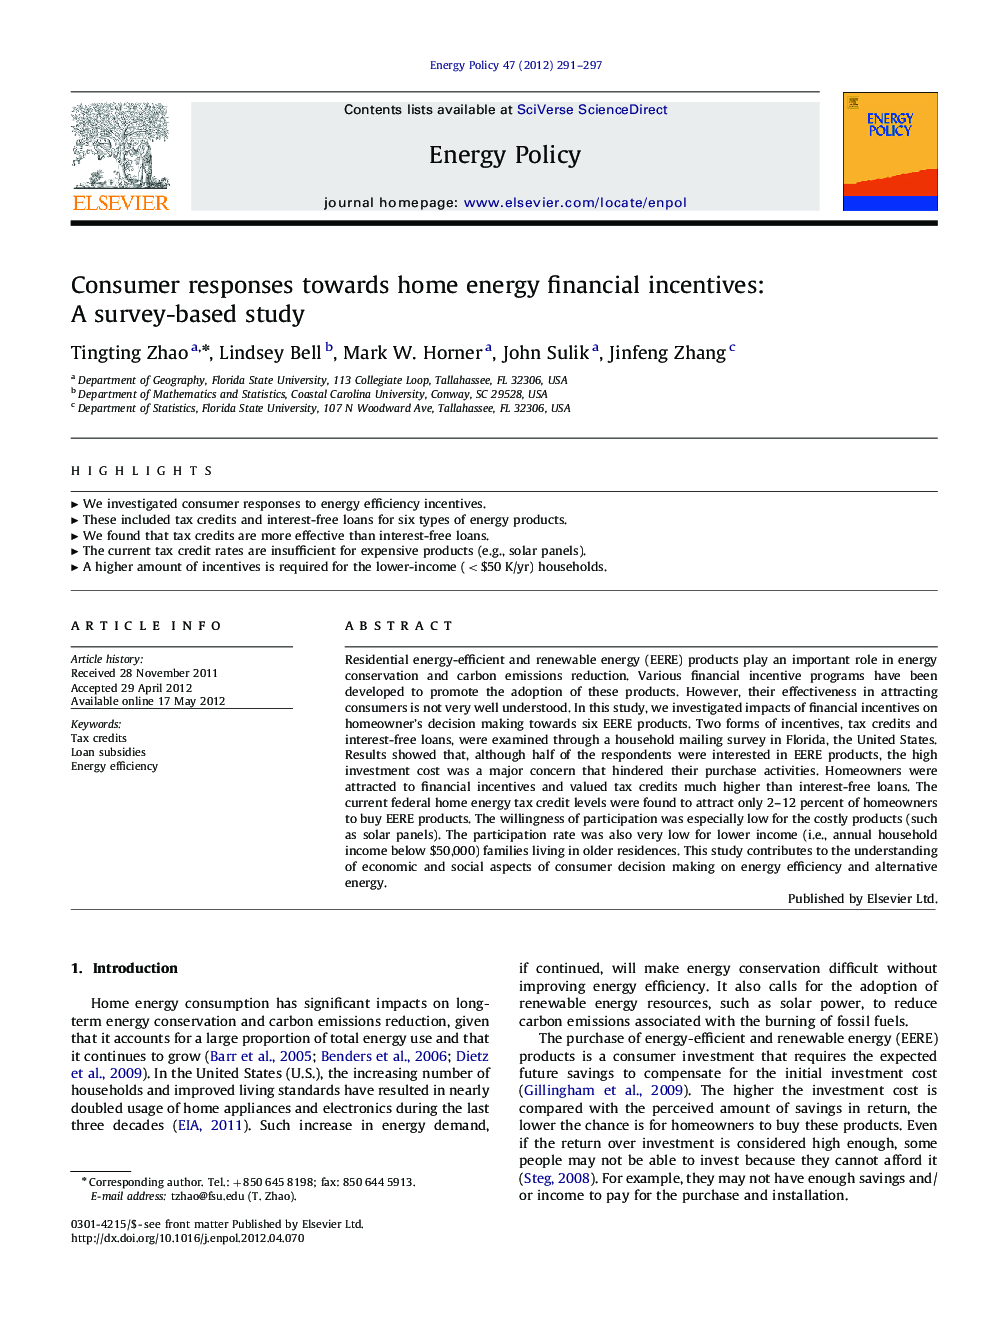 Consumer responses towards home energy financial incentives: A survey-based study